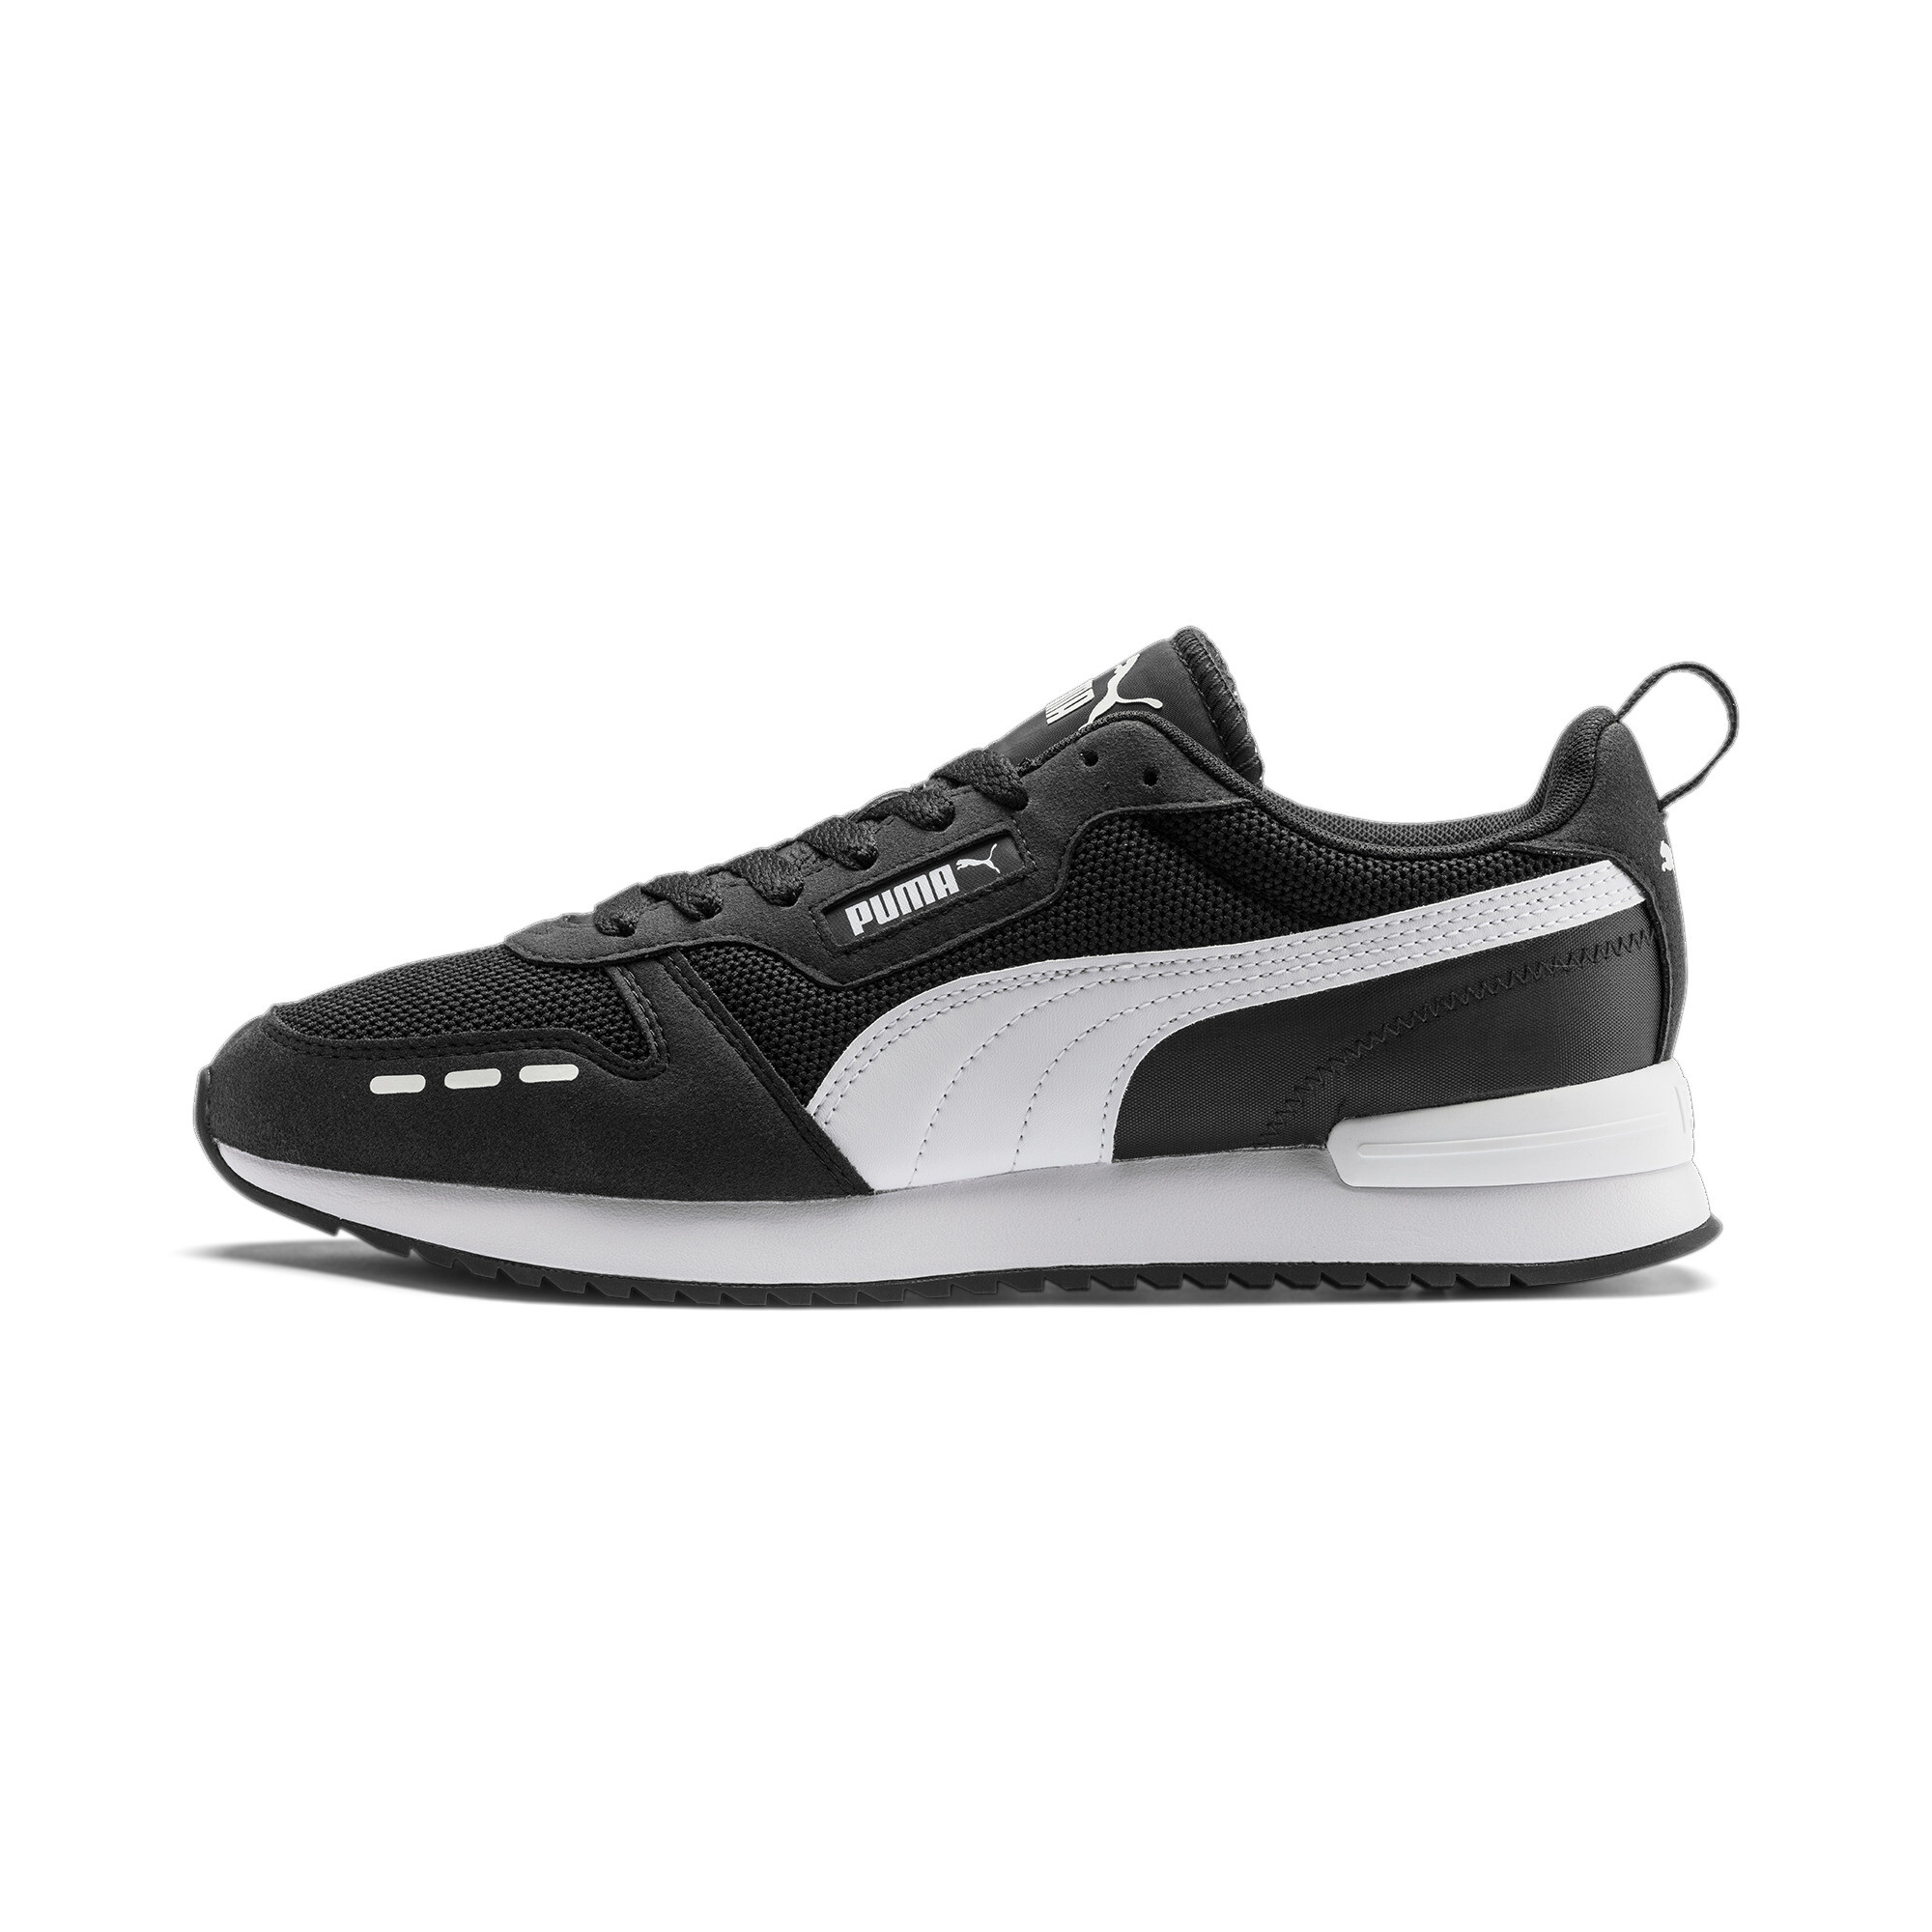 Puma R78 Runner Trainers, Black, Size 37.5, Shoes